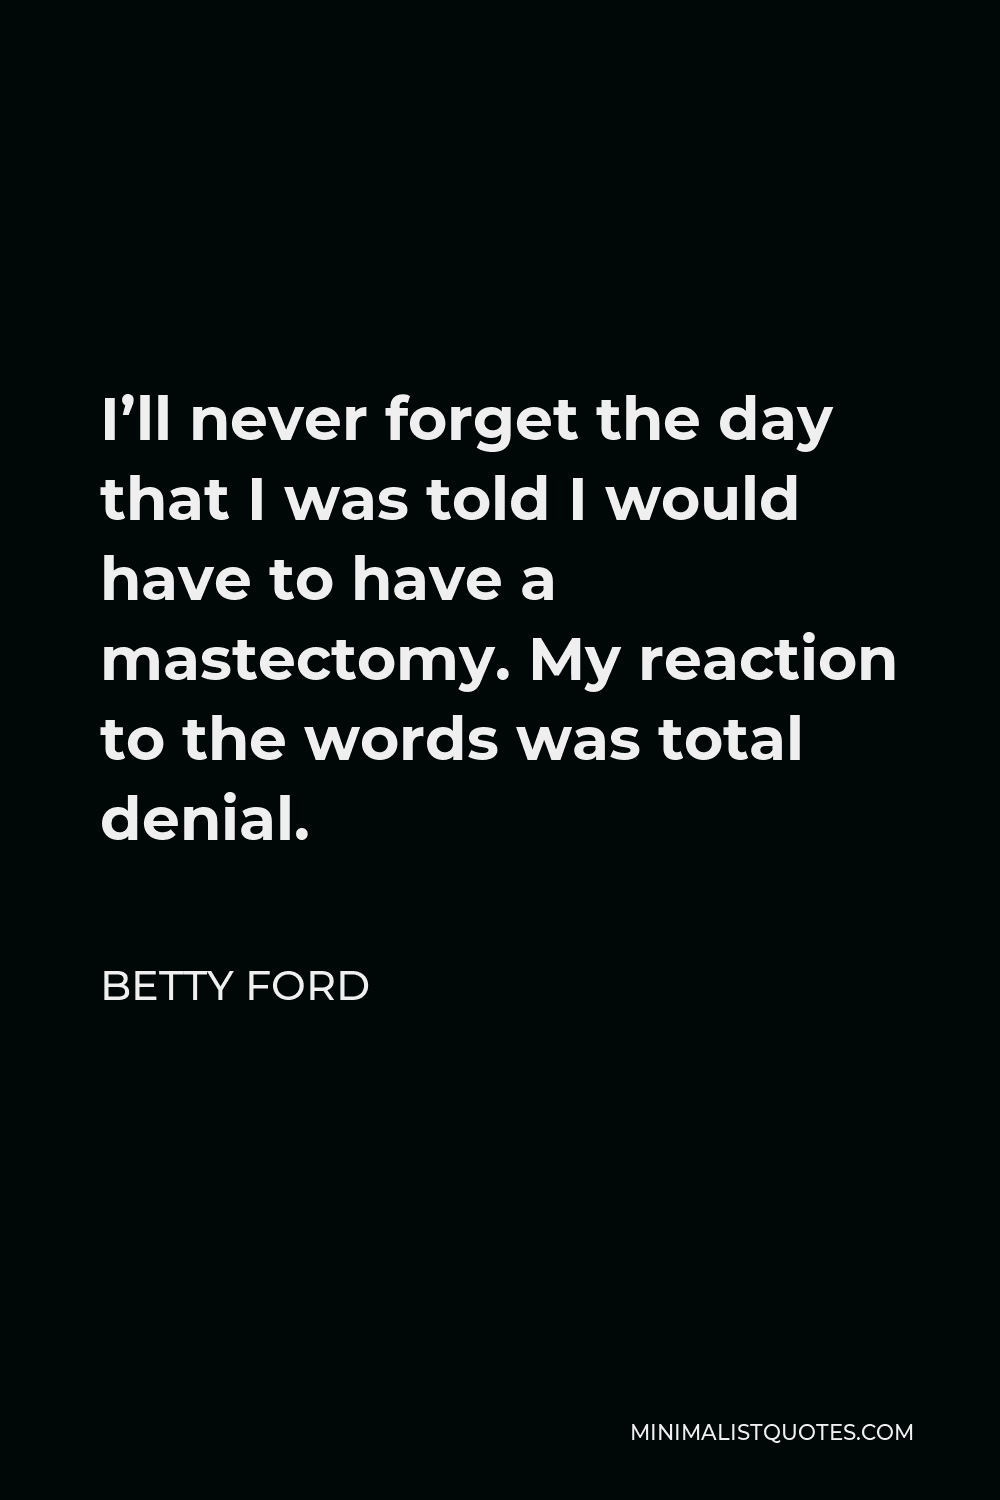 Betty Ford Quote - I’ll never forget the day that I was told I would have to have a mastectomy. My reaction to the words was total denial.